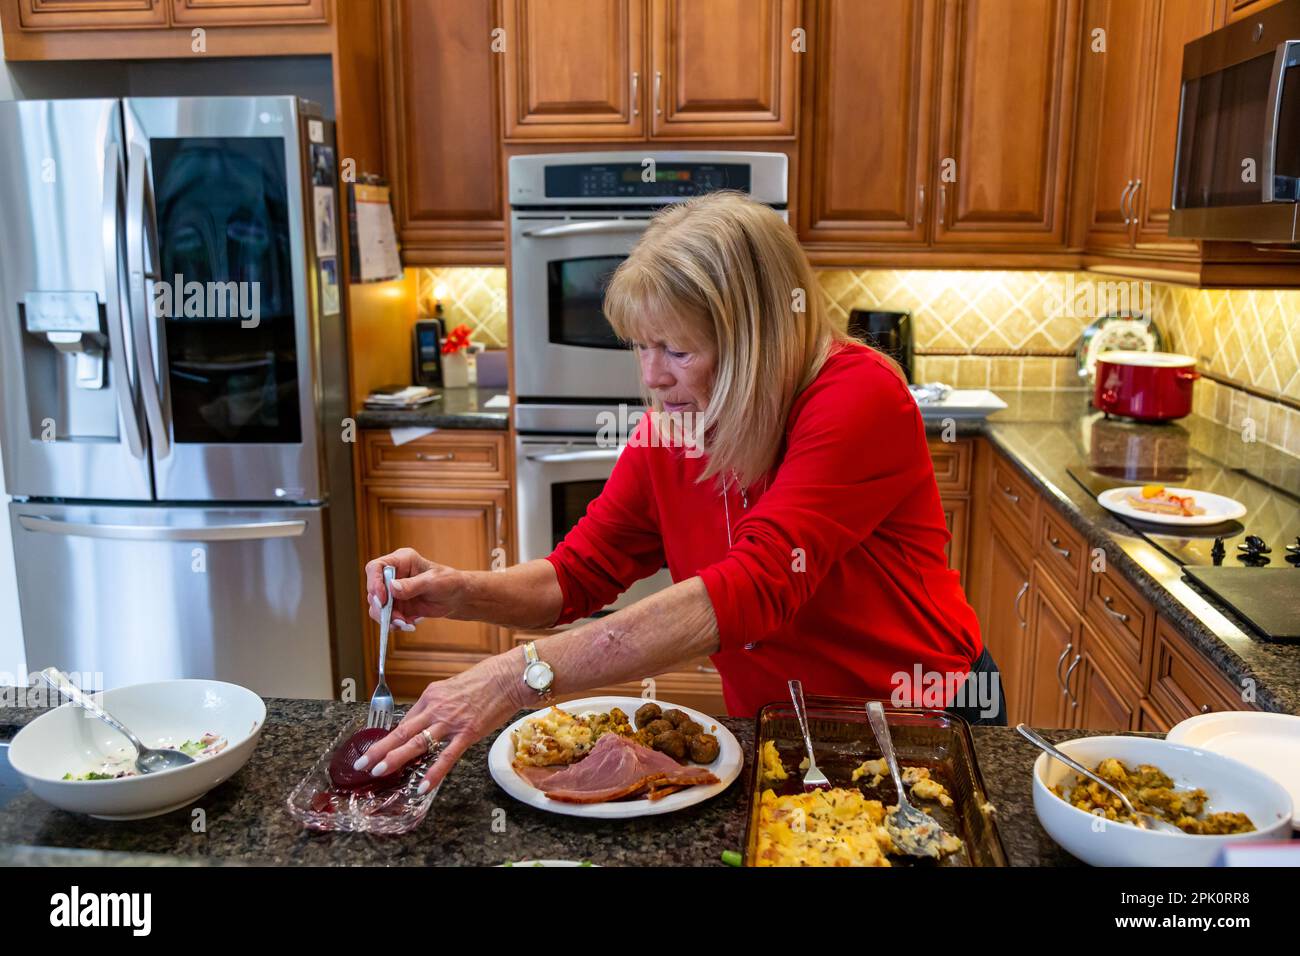 A woman prepares a meal in her American kitchen. Stock Photo